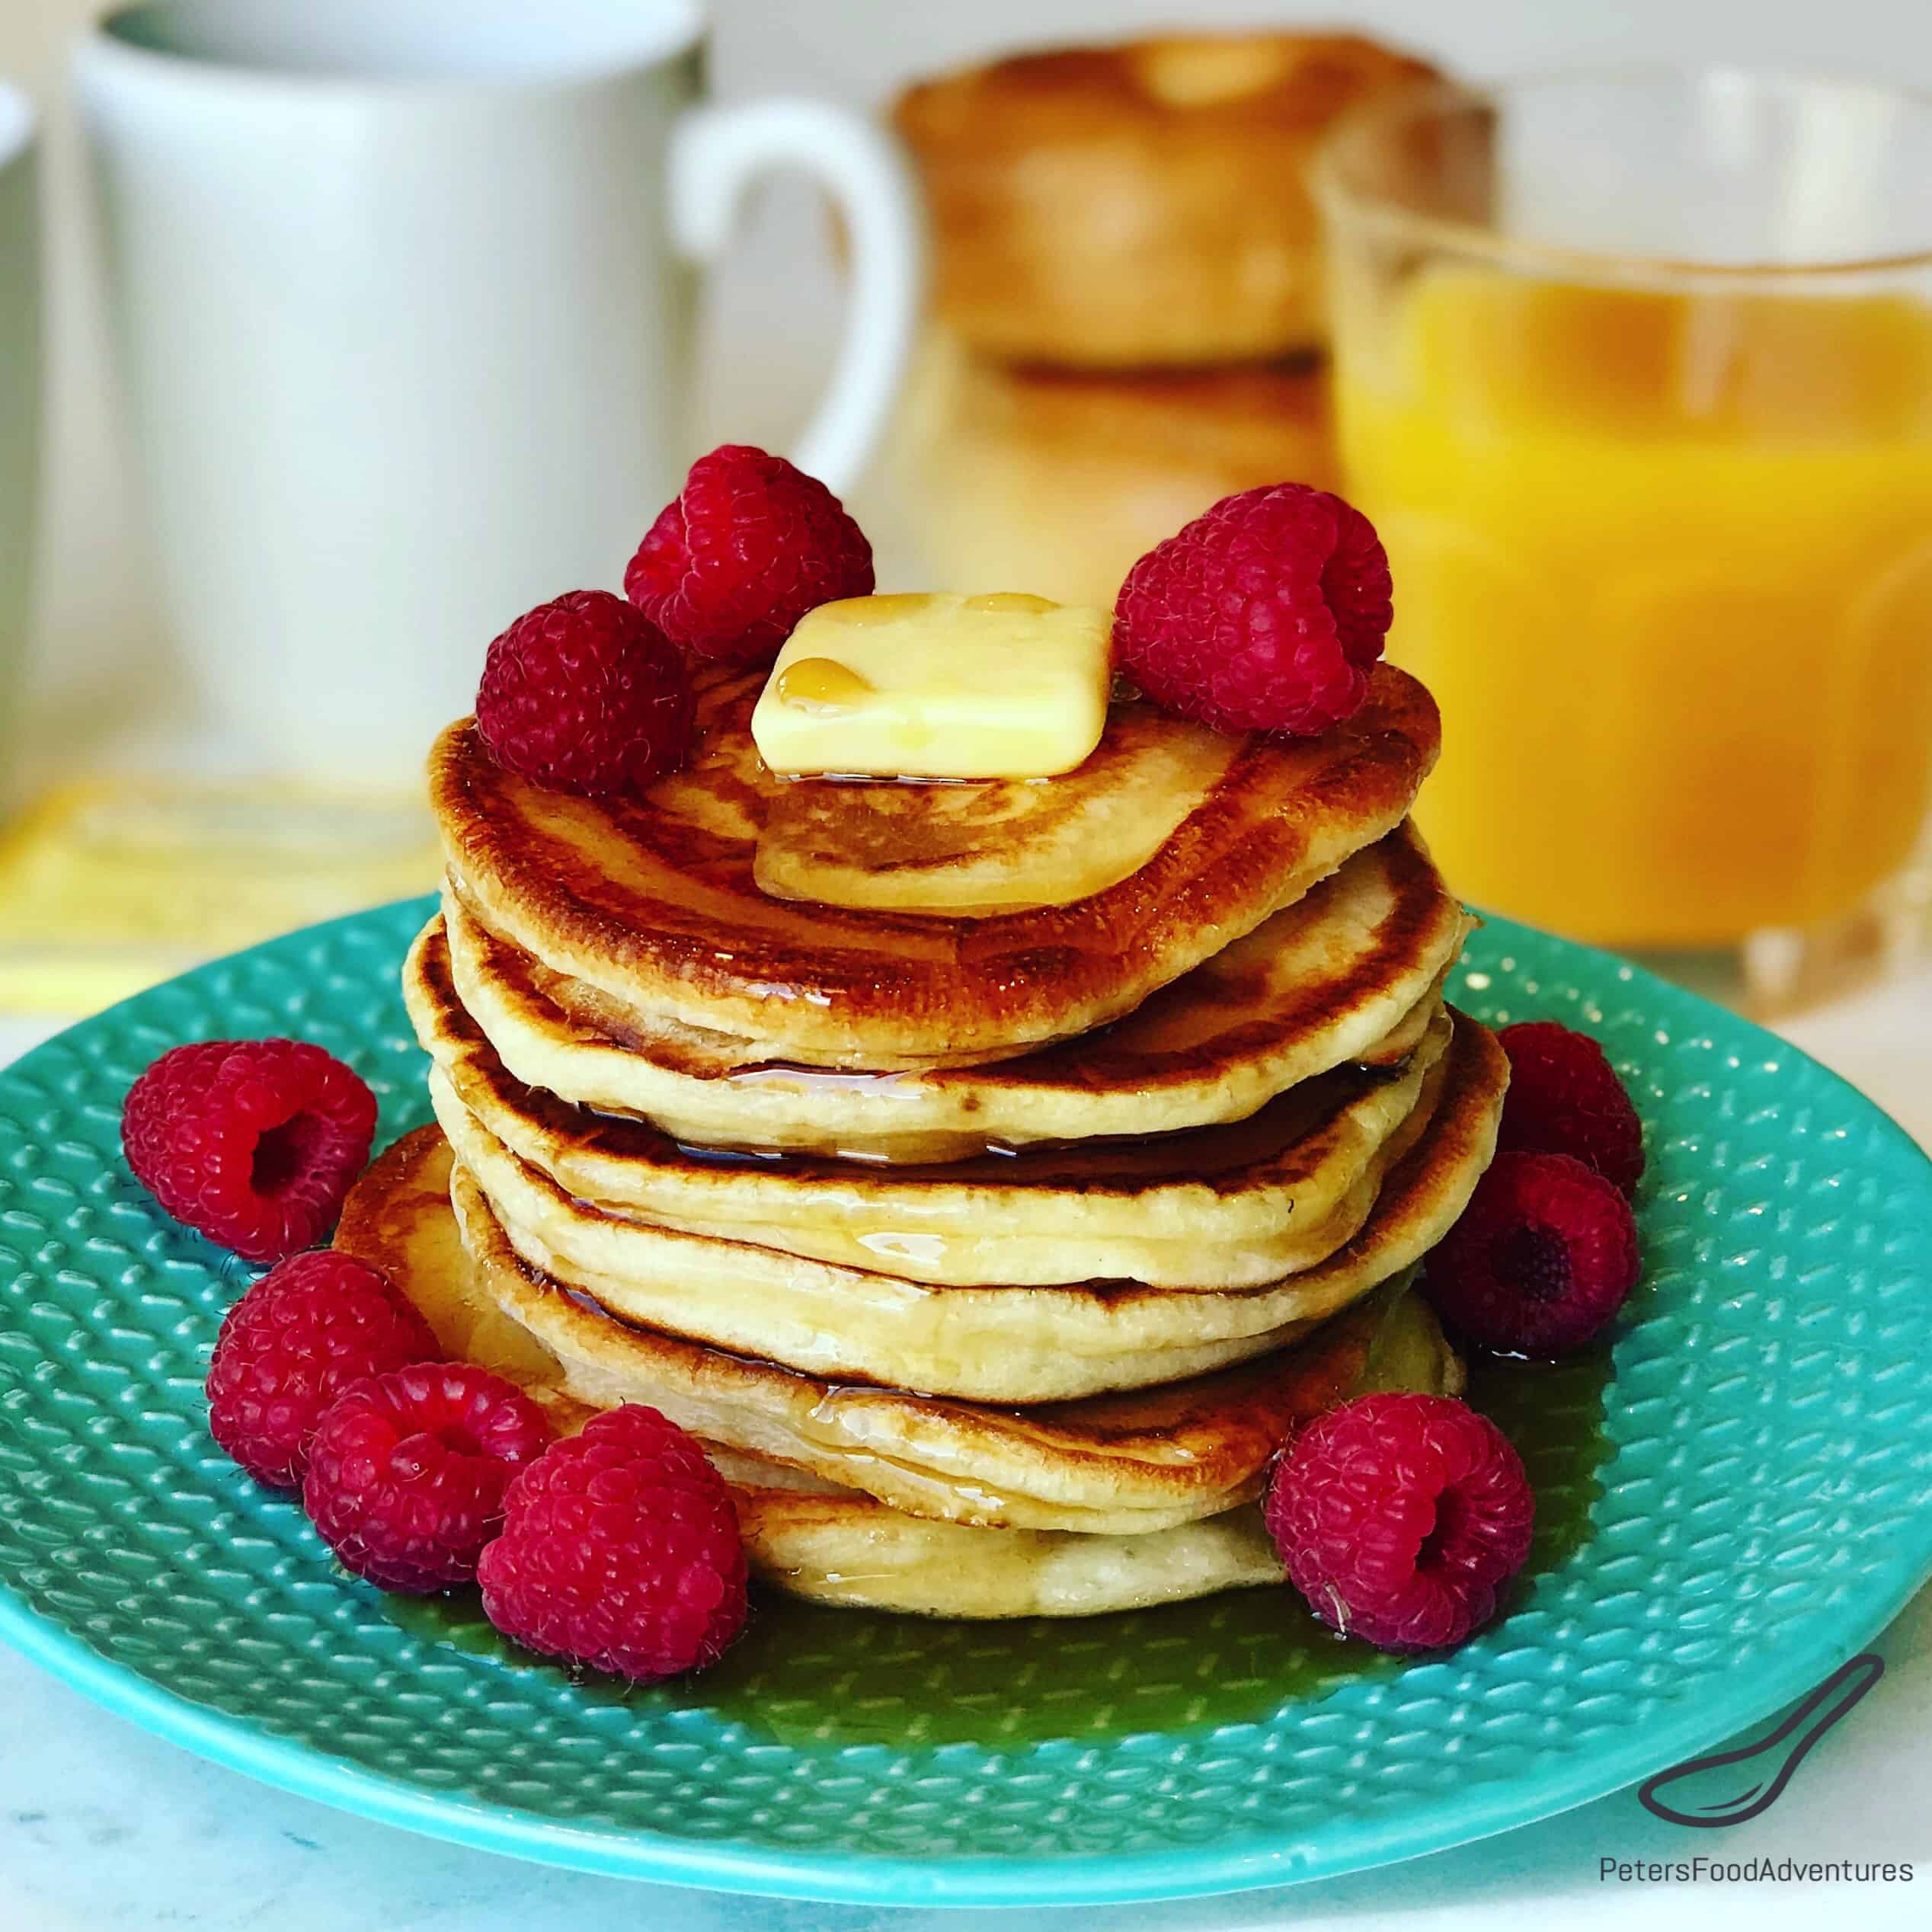 Fluffy Buttermilk Pancakes stacked high. The perfect breakfast drenched in maple syrup, your whole family will love this tasty recipe!